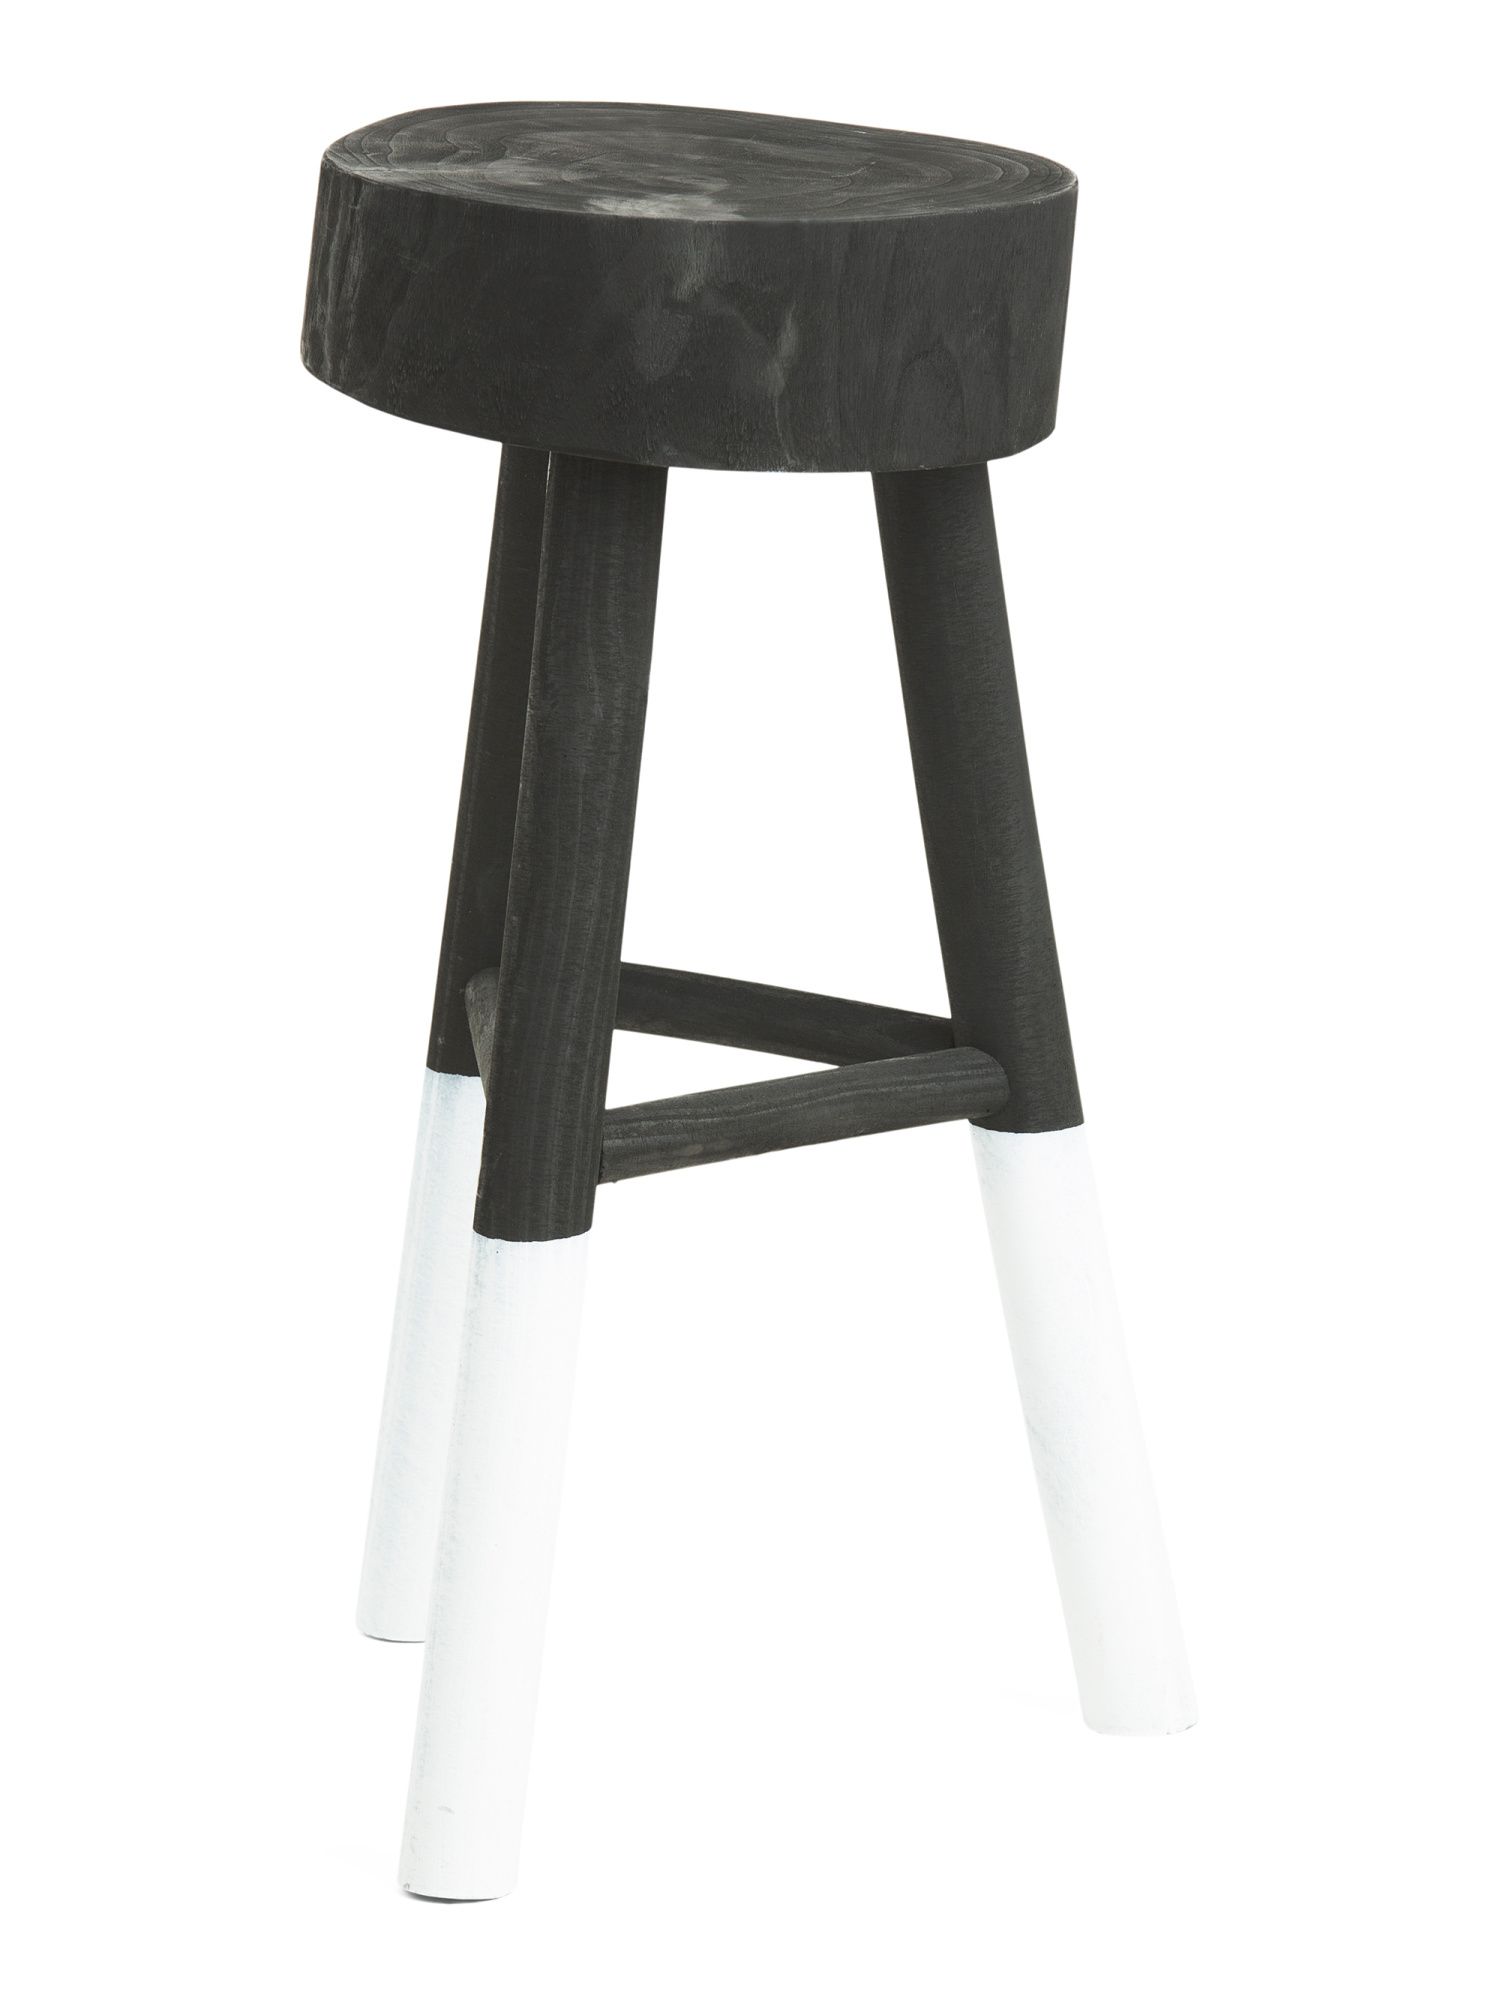 22in Wooden Two Tone Stool | TJ Maxx